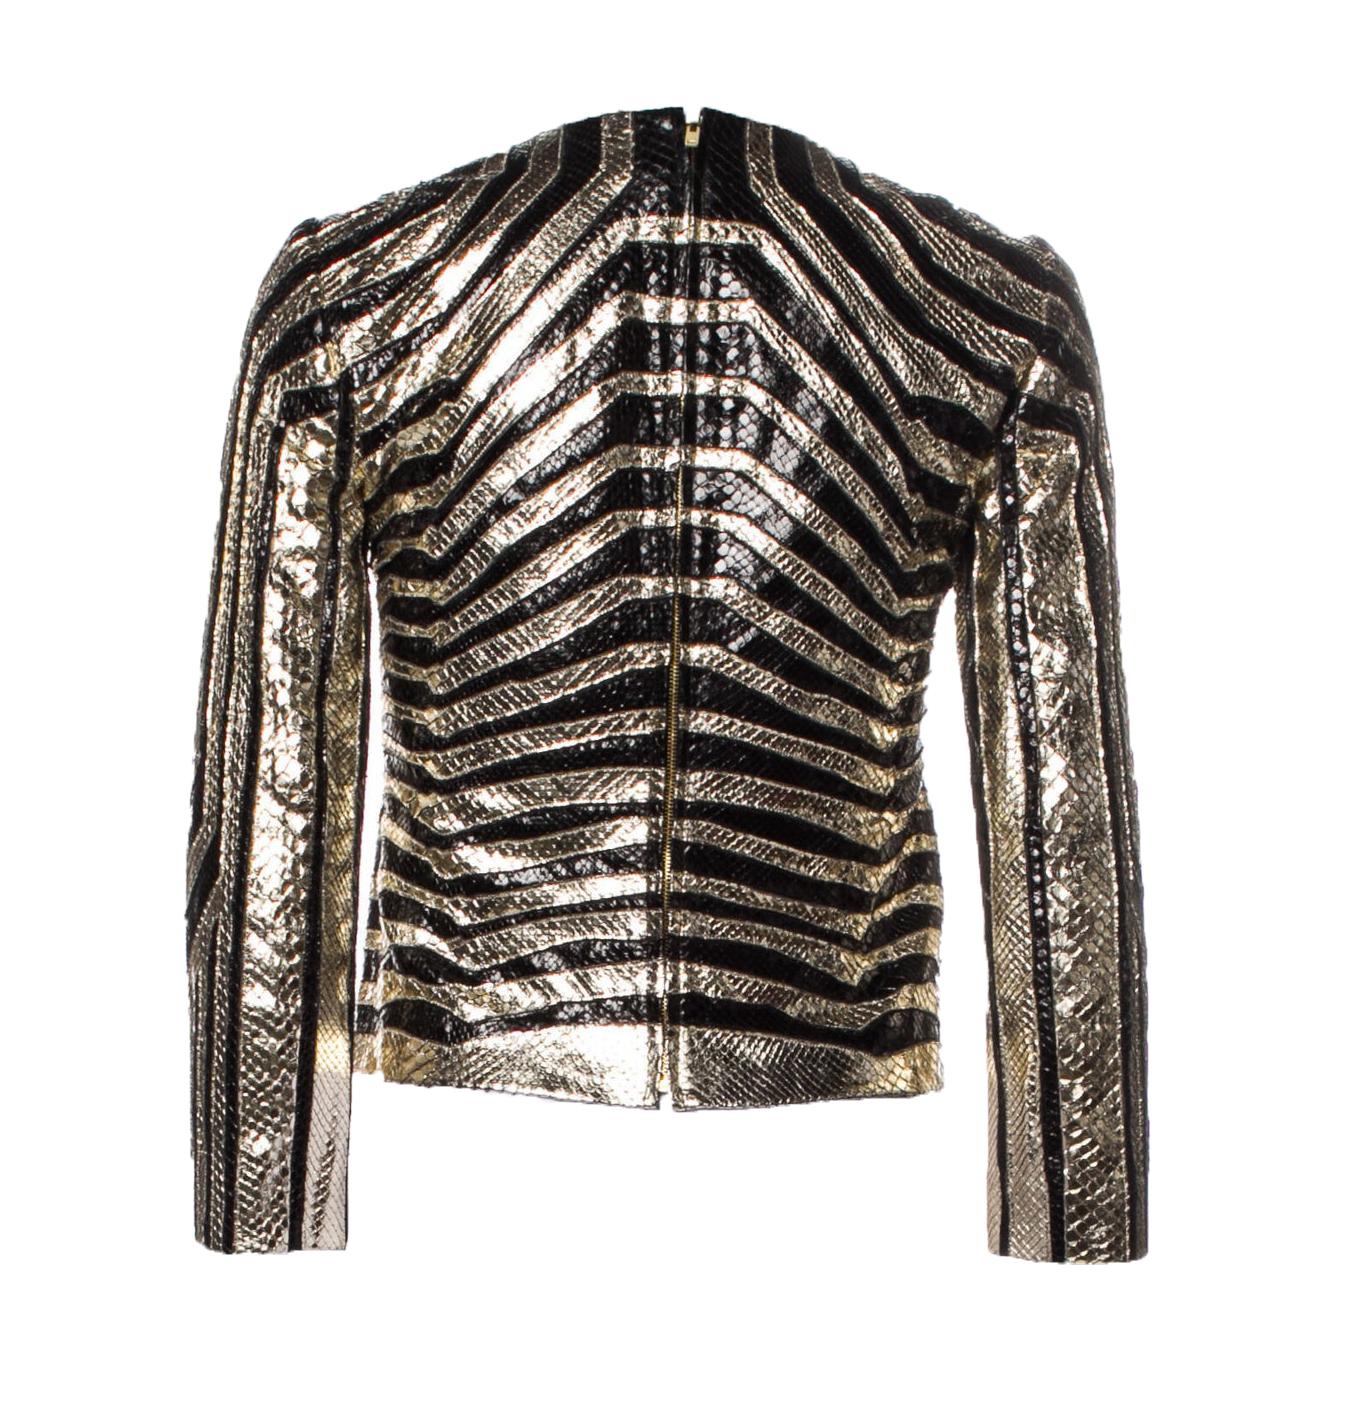 Gucci Python Black Gold Jacket - Famous, Hot and Sexy !!! - Limited Edition !!!
Same Jacket JLO was wearing for the Song *Follow the Leader*
S/S 2012 Runway Collection
Tag Size was Cut-Out - Please Check Measurements
Real Python, Black and Soft Gold